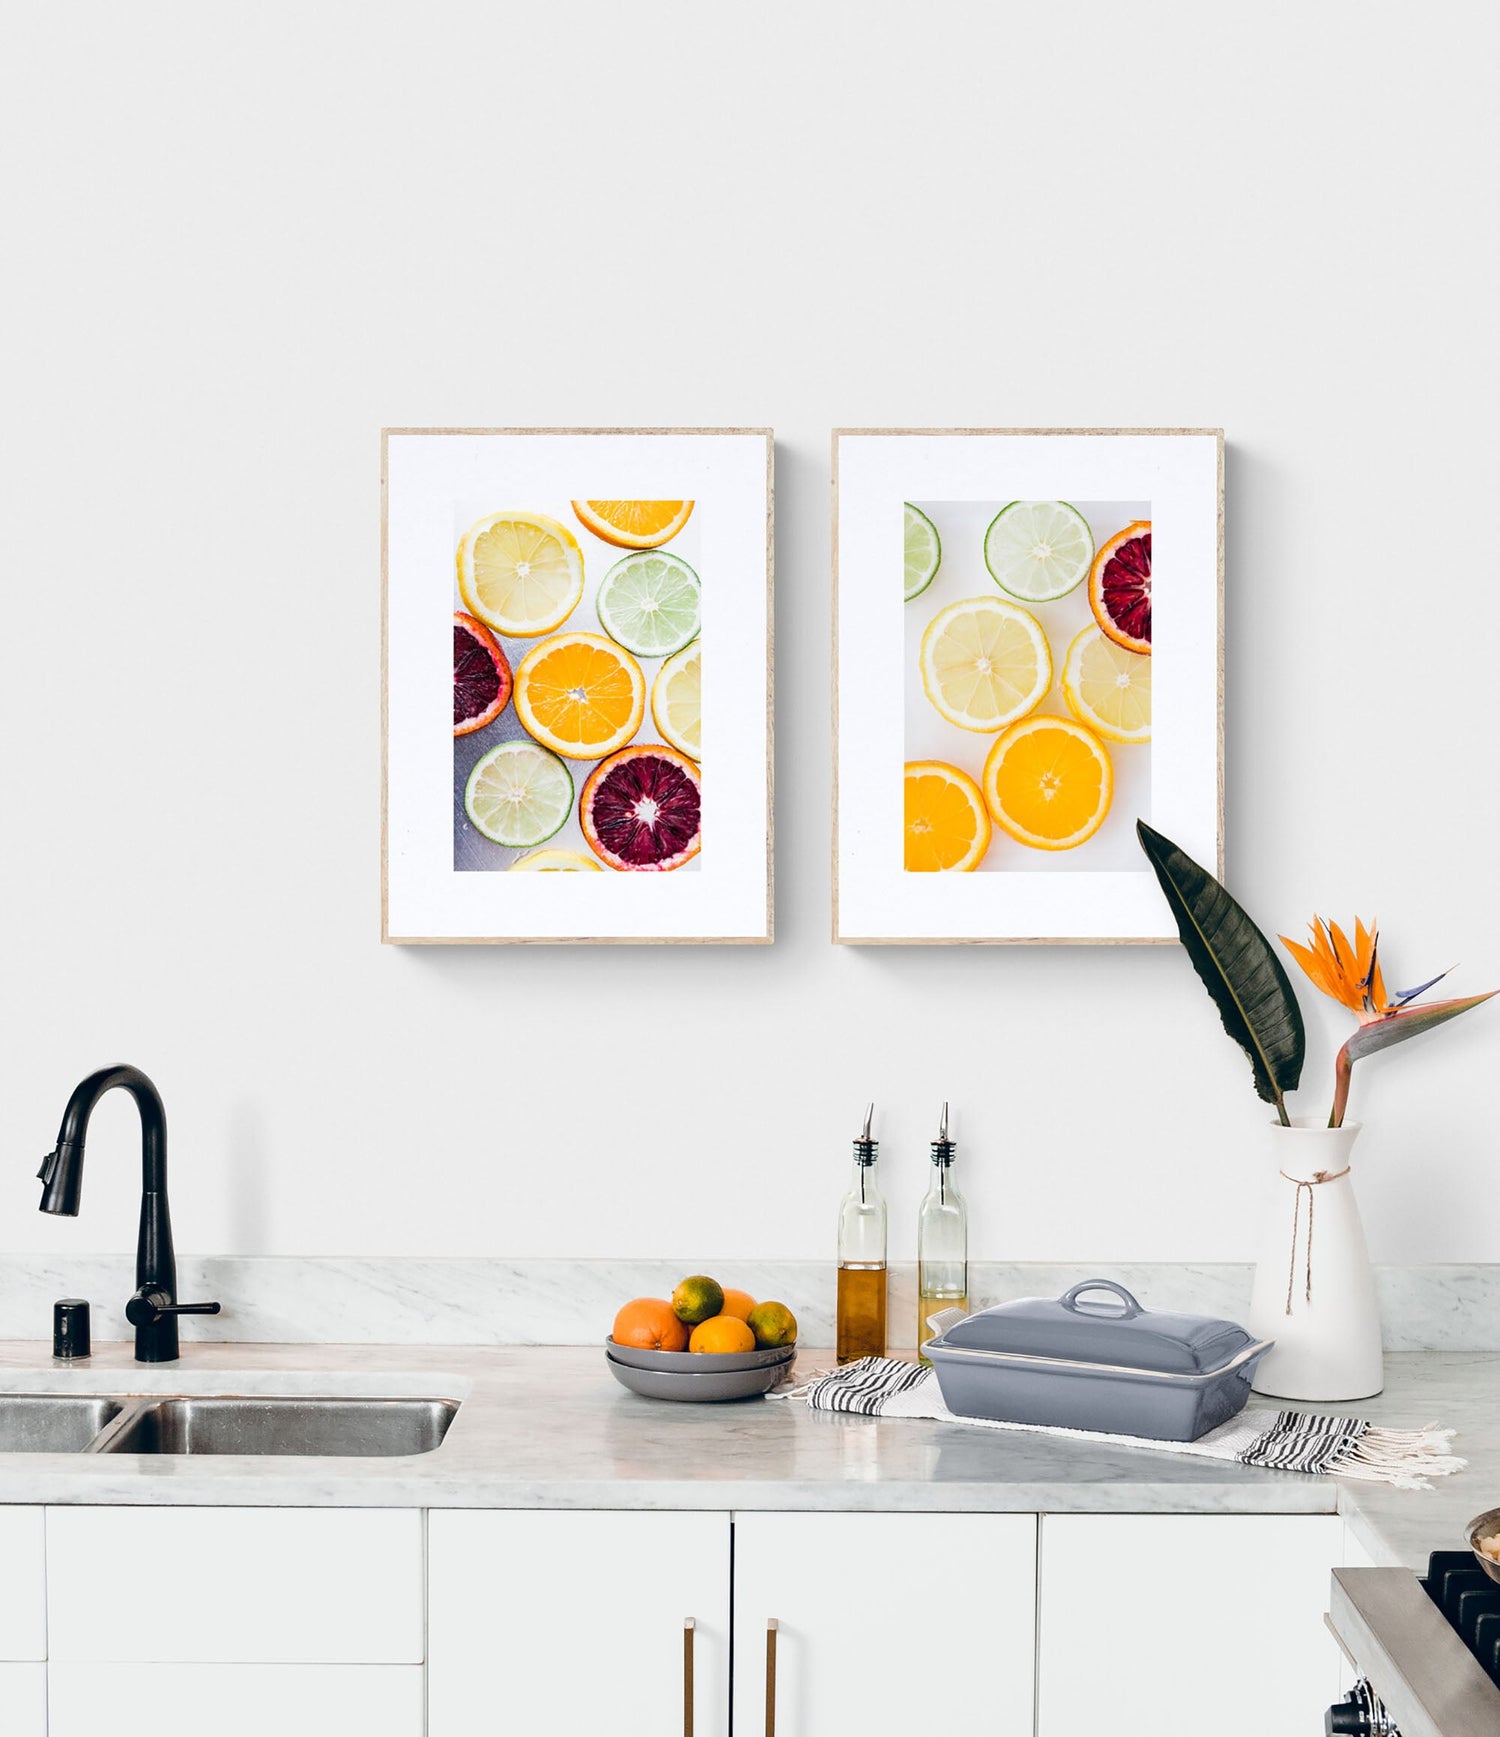 Two Framed of Photographs of Citrus Slices in a Kitchen as Wall Art